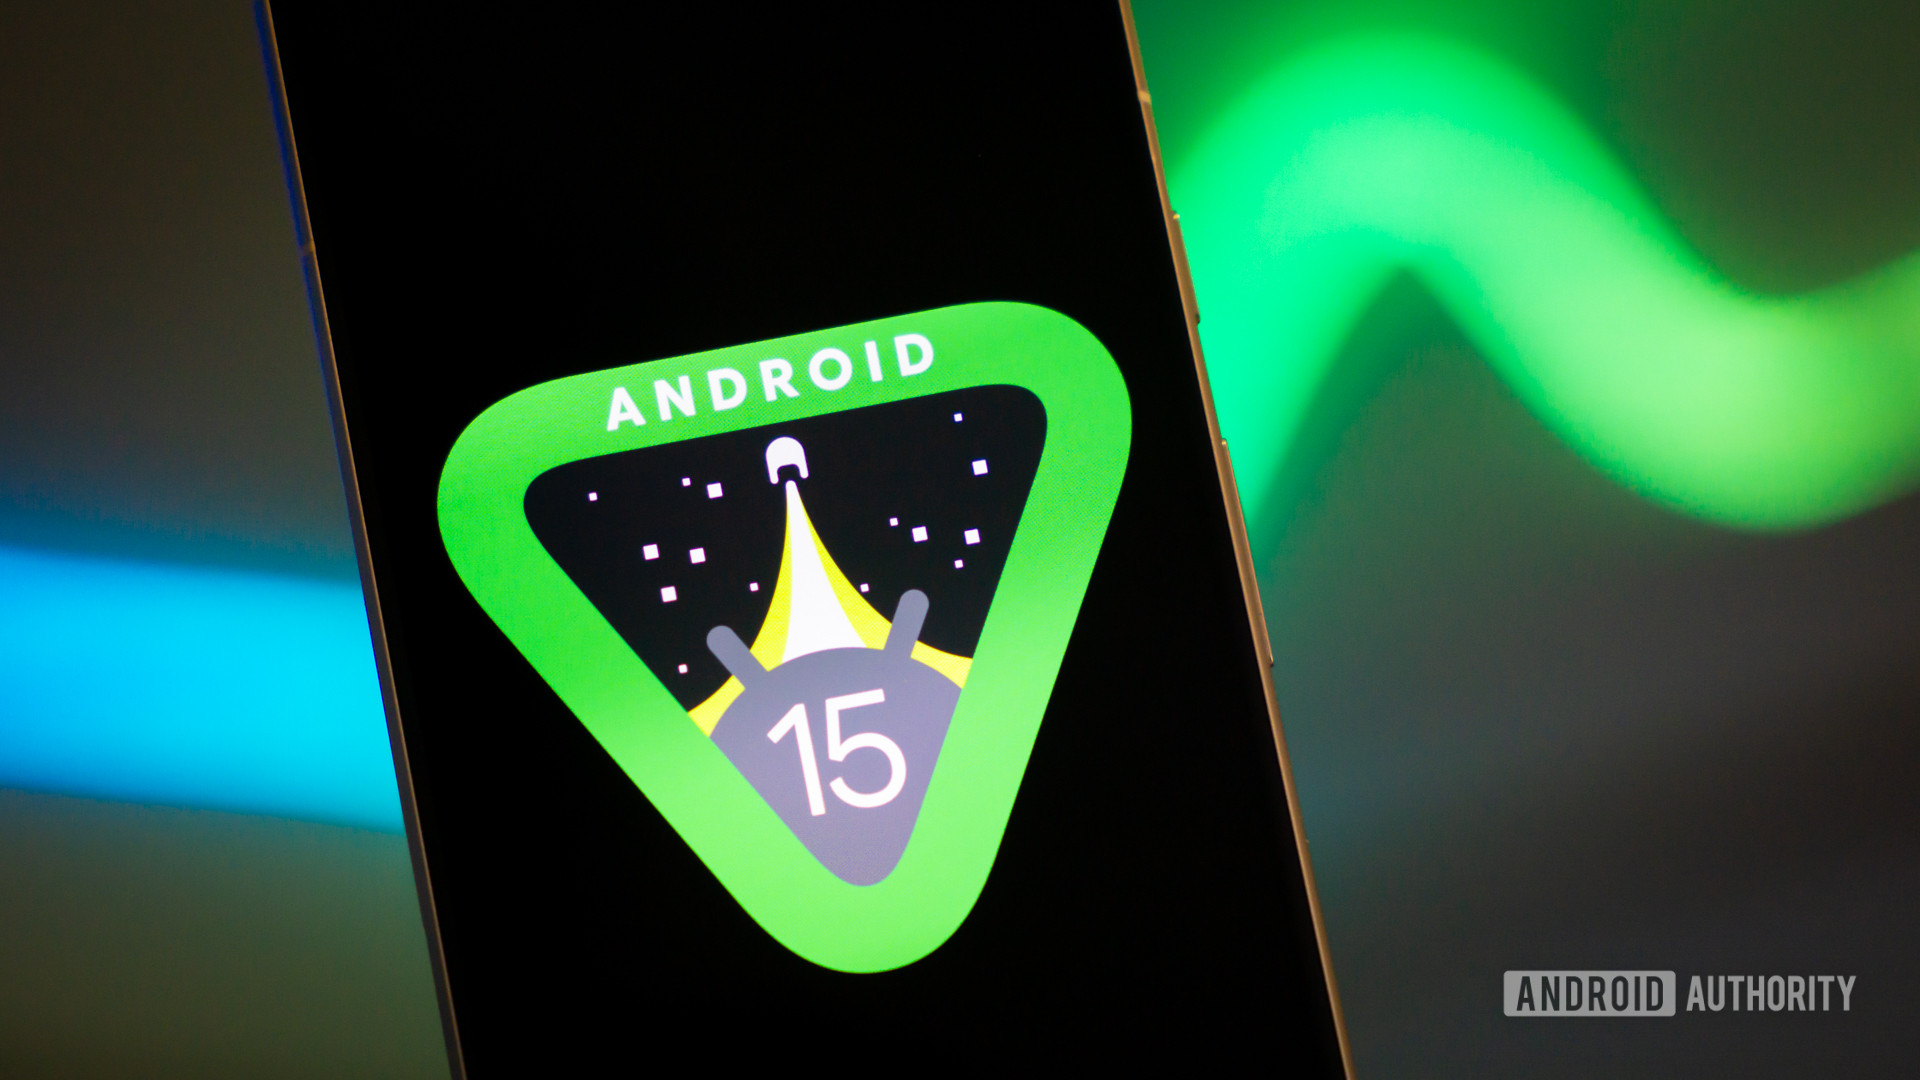 Android 15 logo on smartphone with light strip in background stock photo (16)